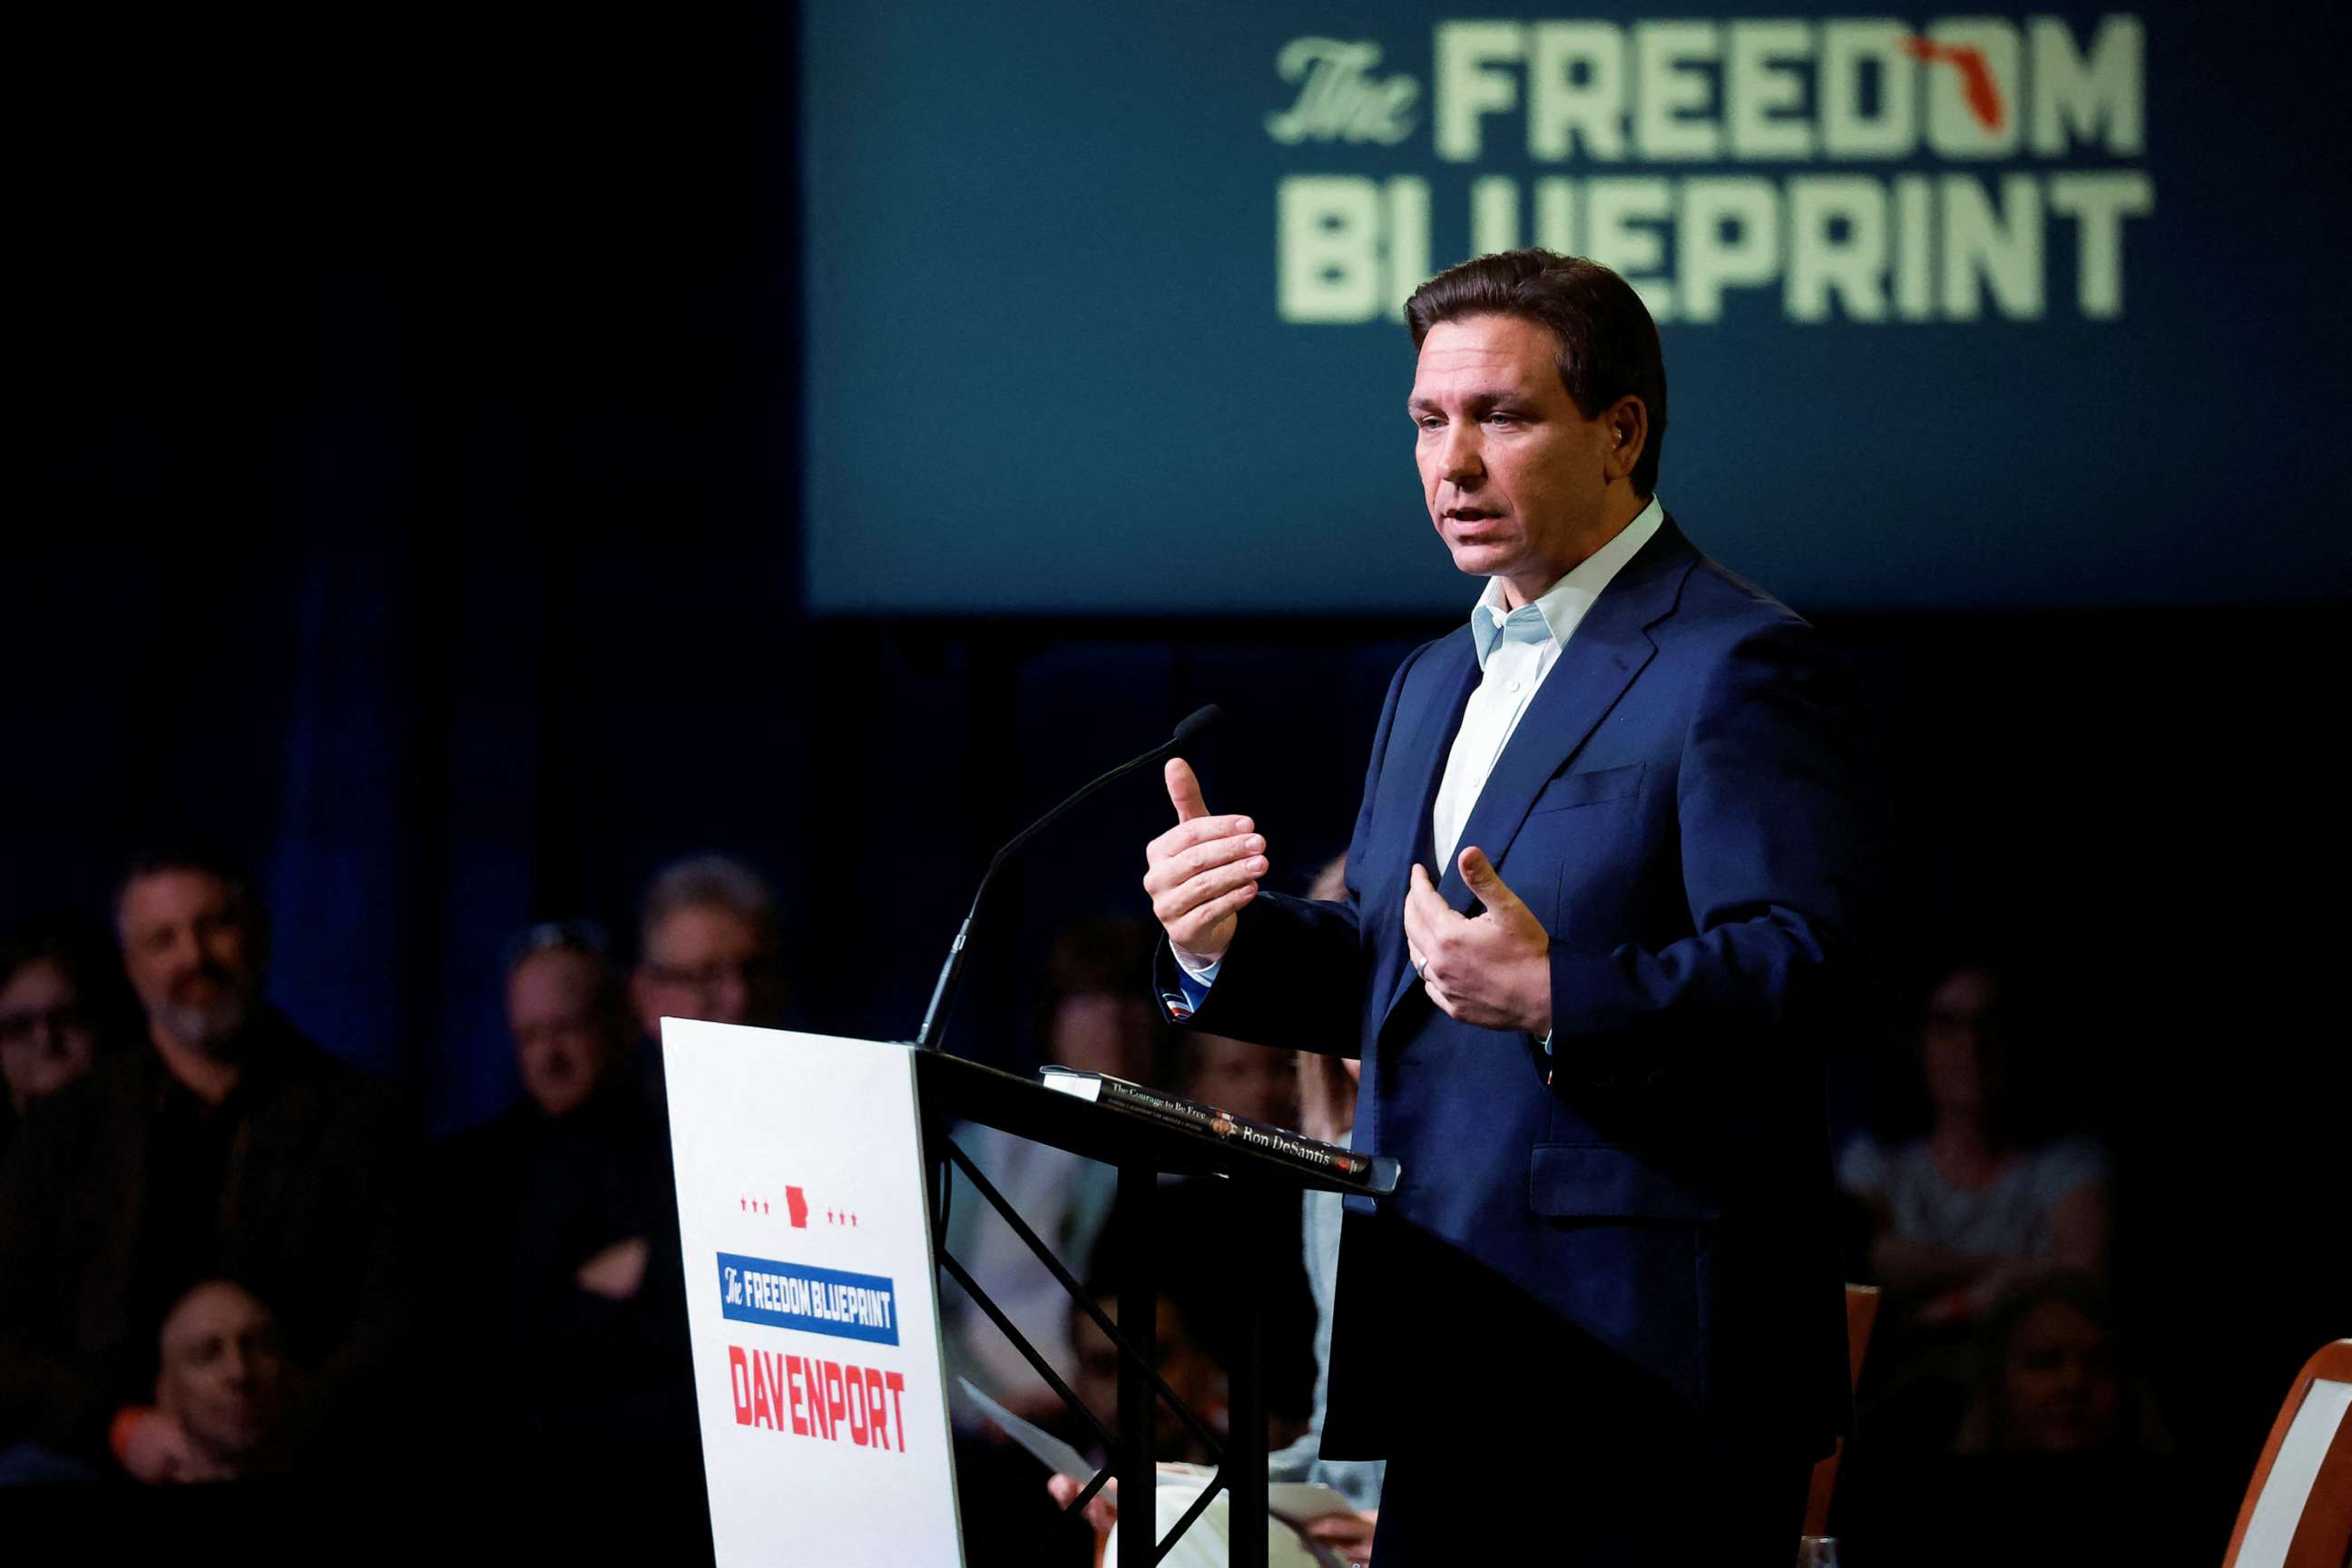 PHOTO: Florida Governor Ron DeSantis makes his first trip to the early voting state of Iowa on a book tour stop, in Davenport, Iowa, March 10, 2023.